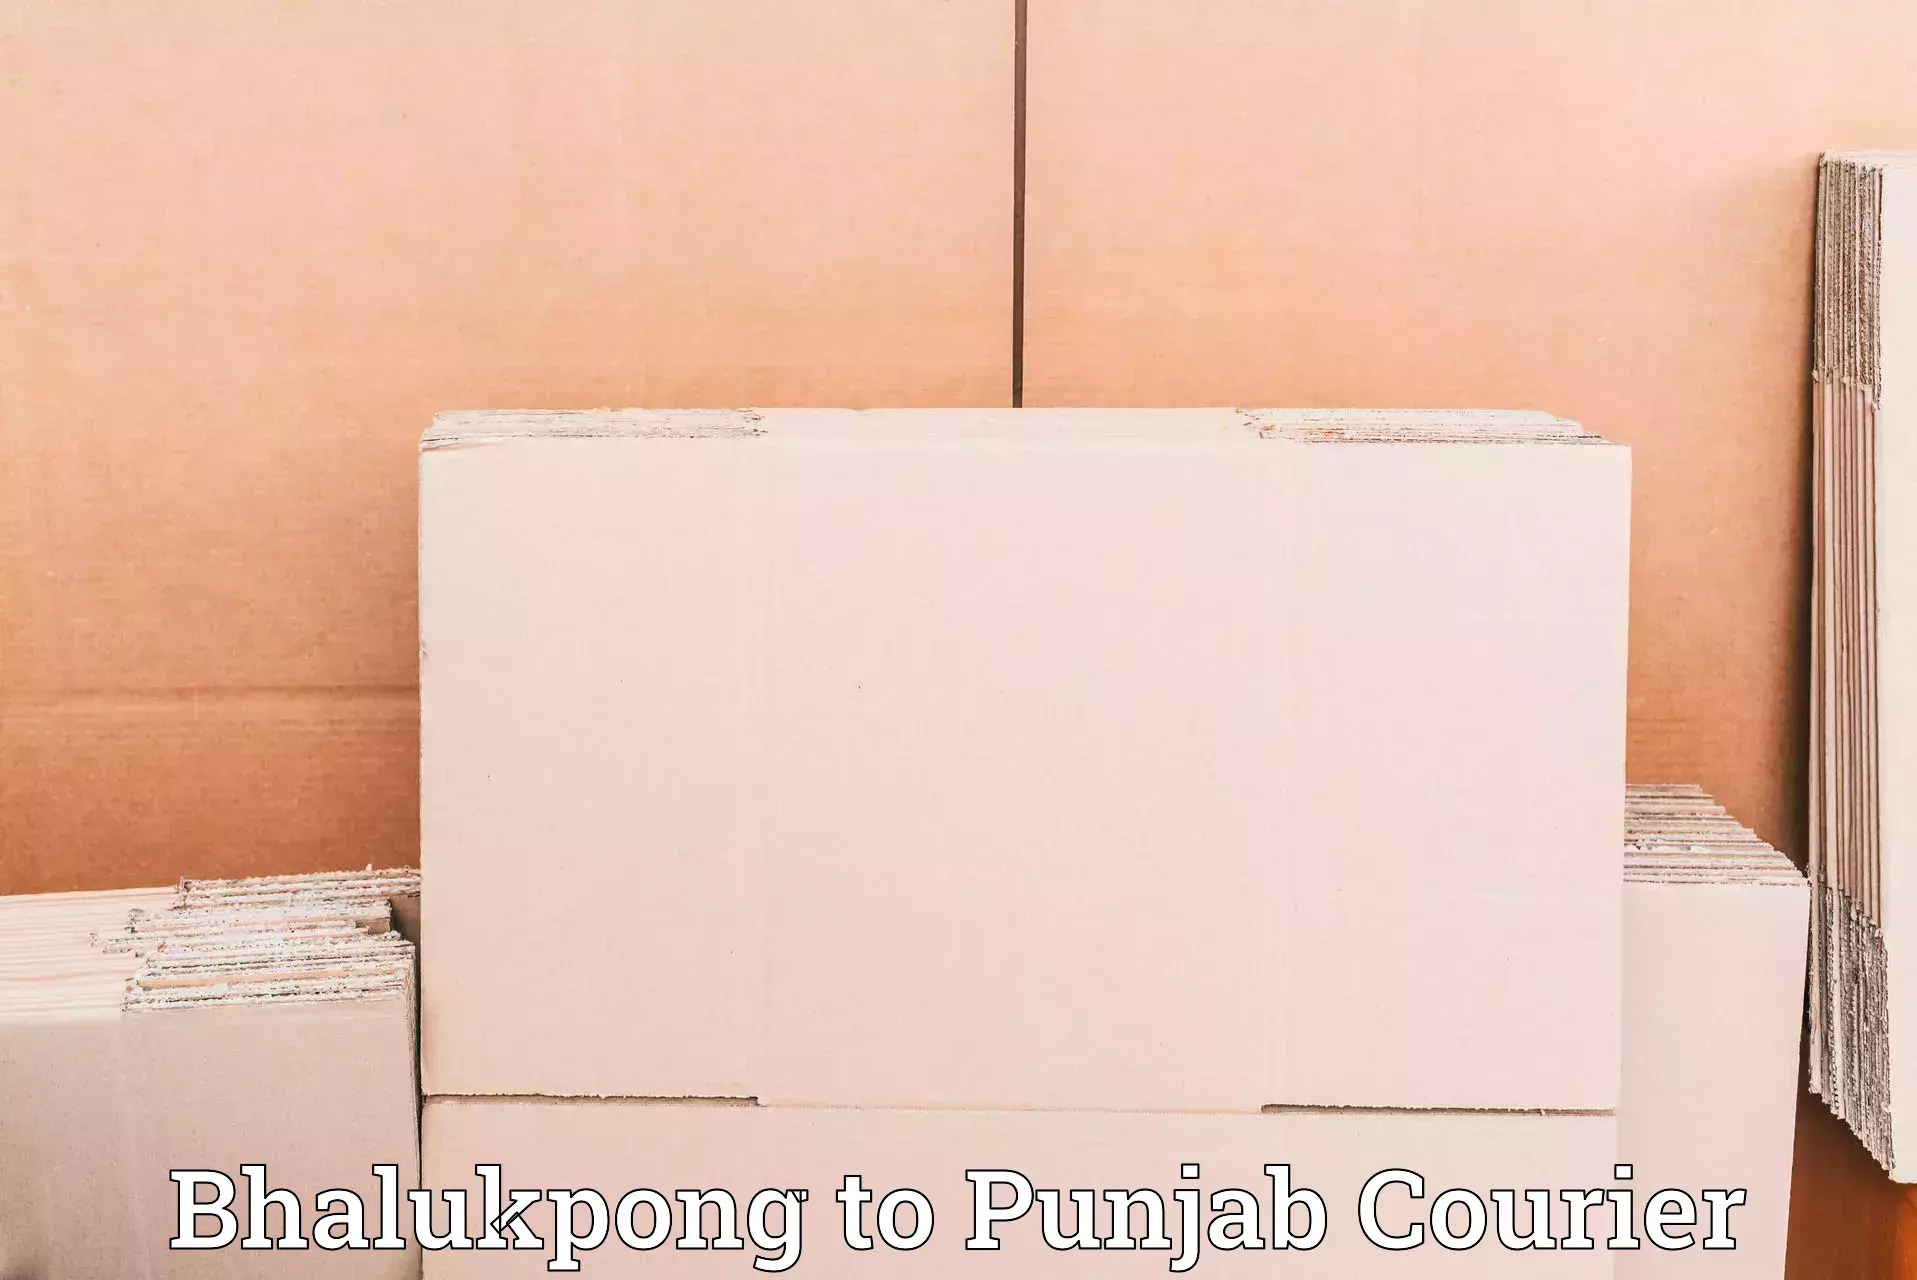 Full-service courier options Bhalukpong to Punjab